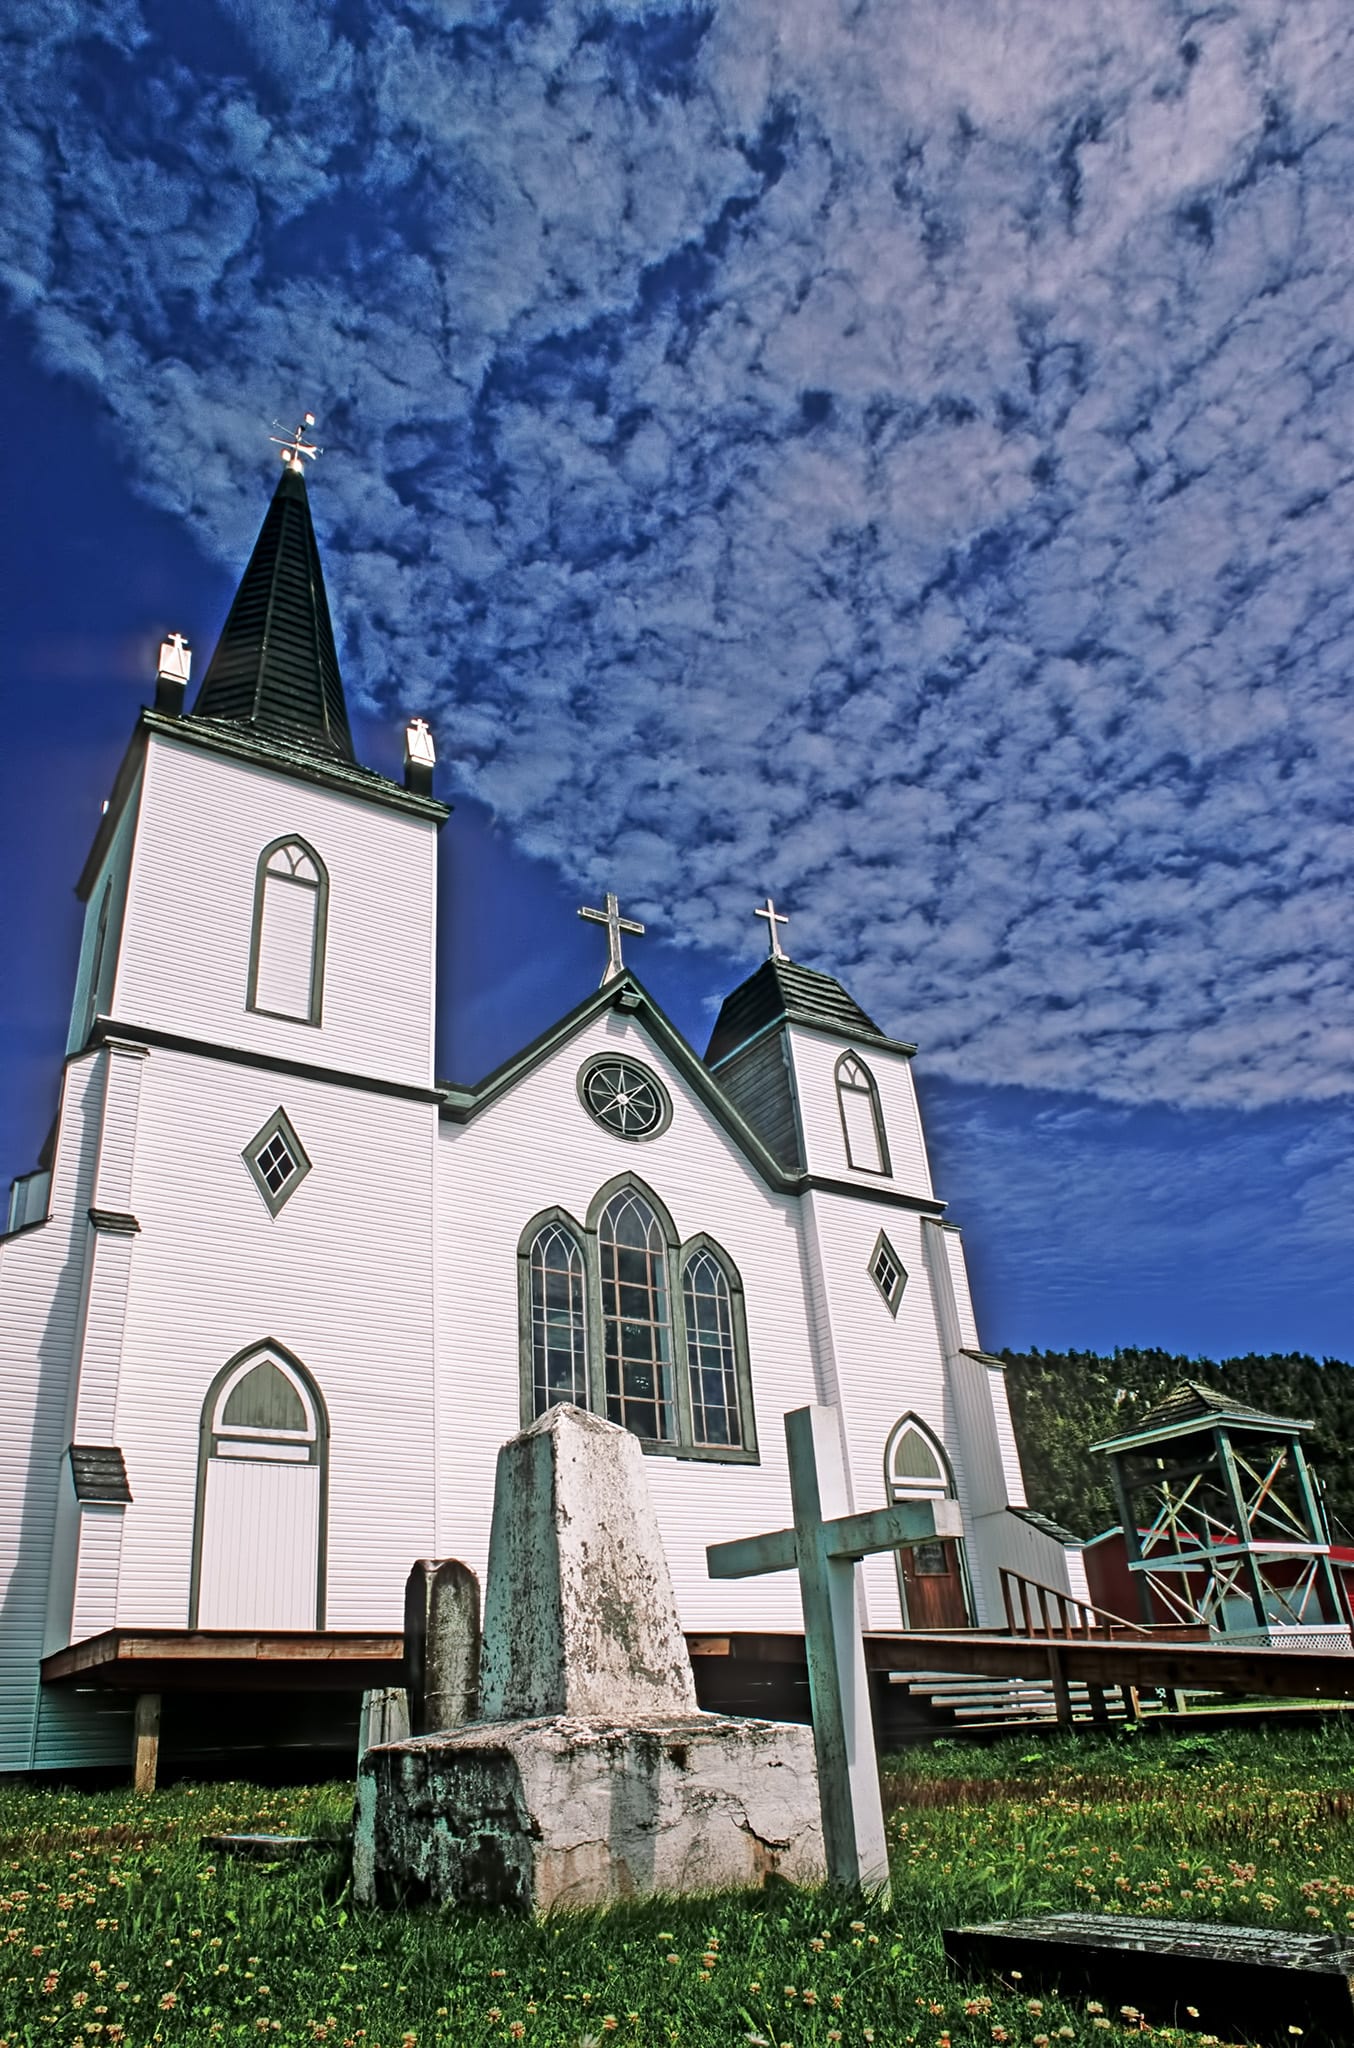 Christ Church at Kincolith in the Nass Valley, British Columbia, Canada.